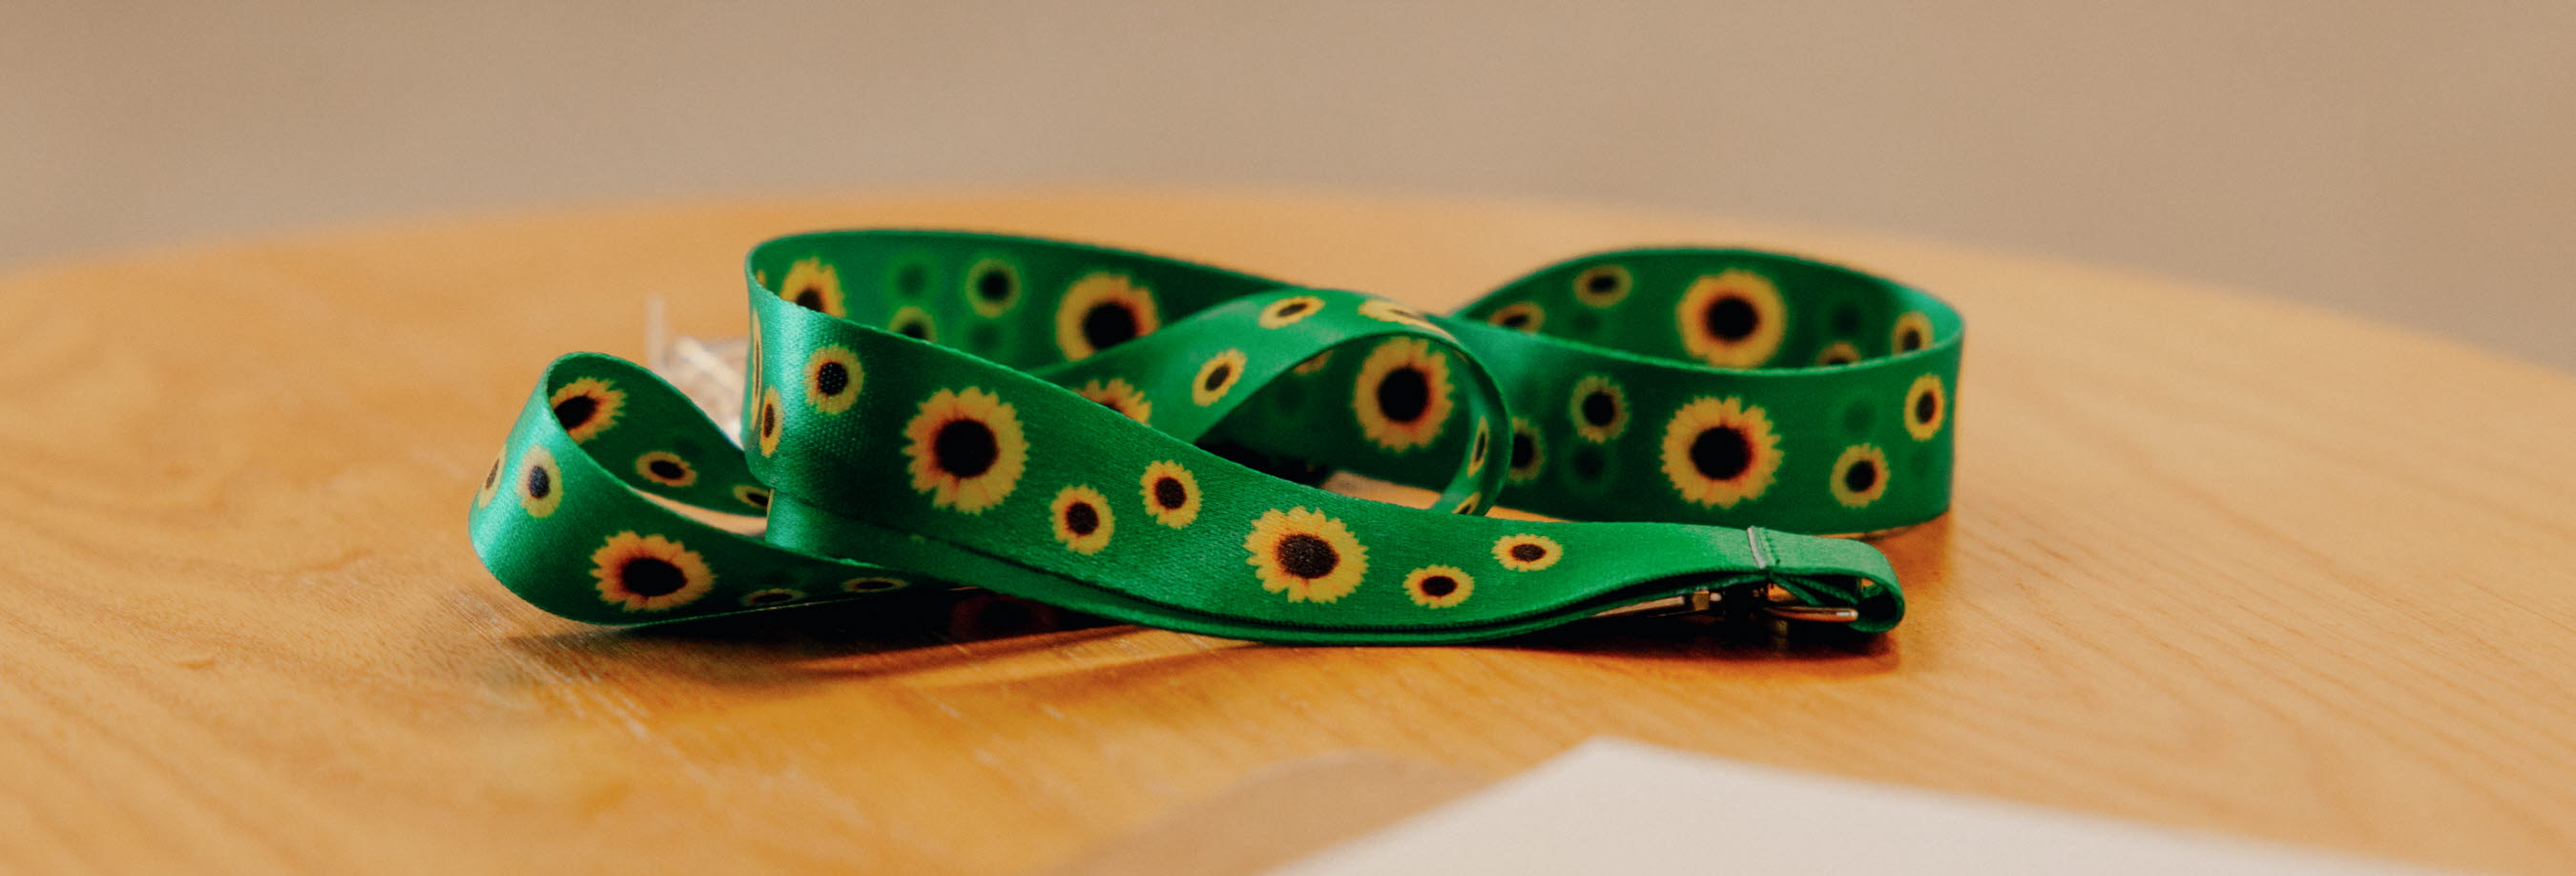 Christchurch Airport introduces sunflower lanyards for passengers with hidden disabilities